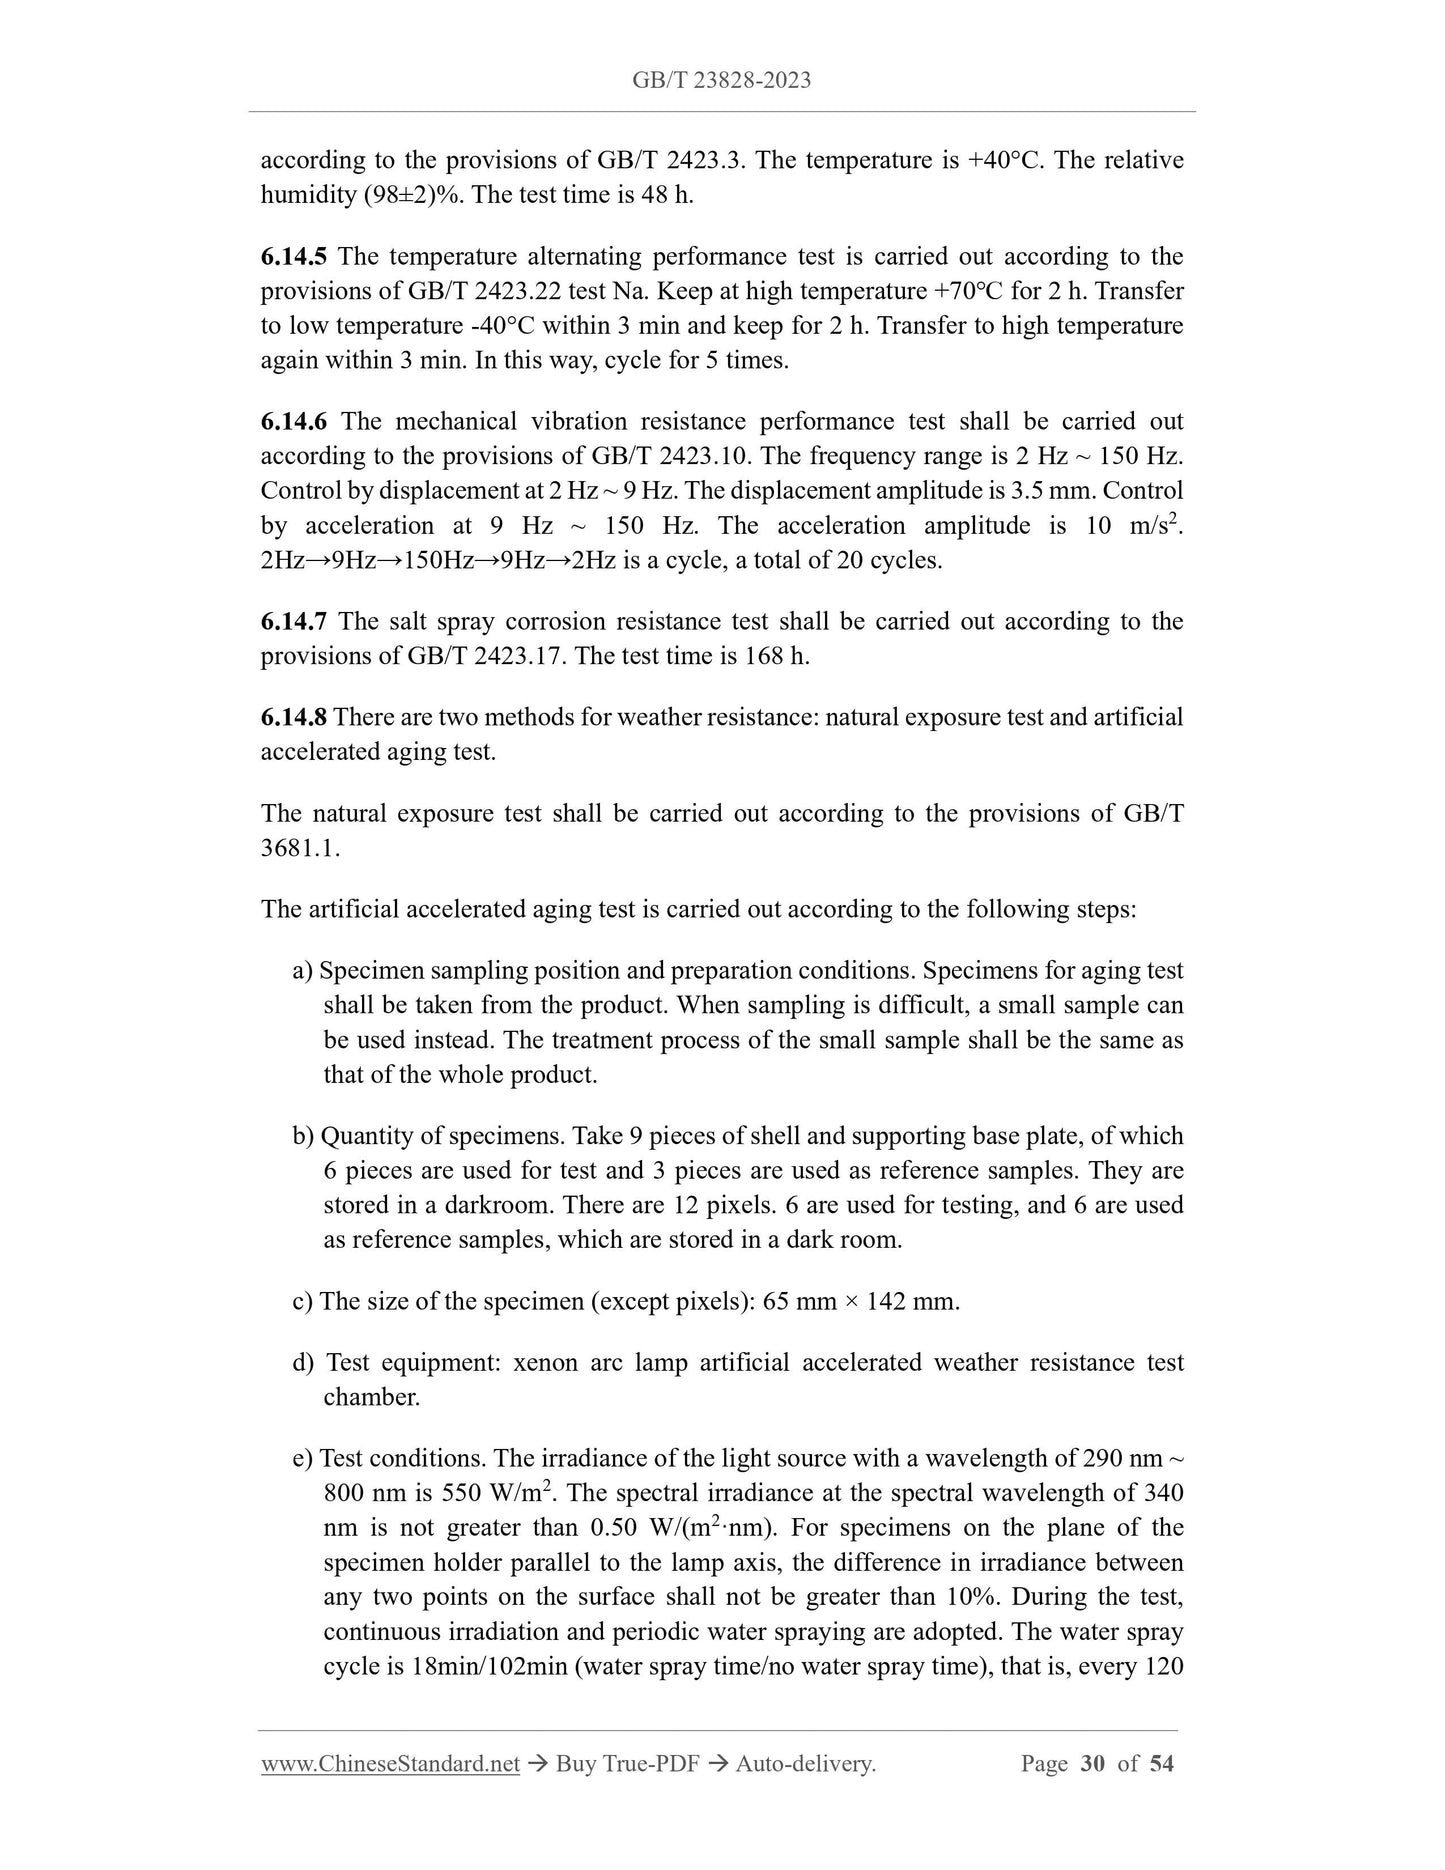 GB/T 23828-2023 Page 11